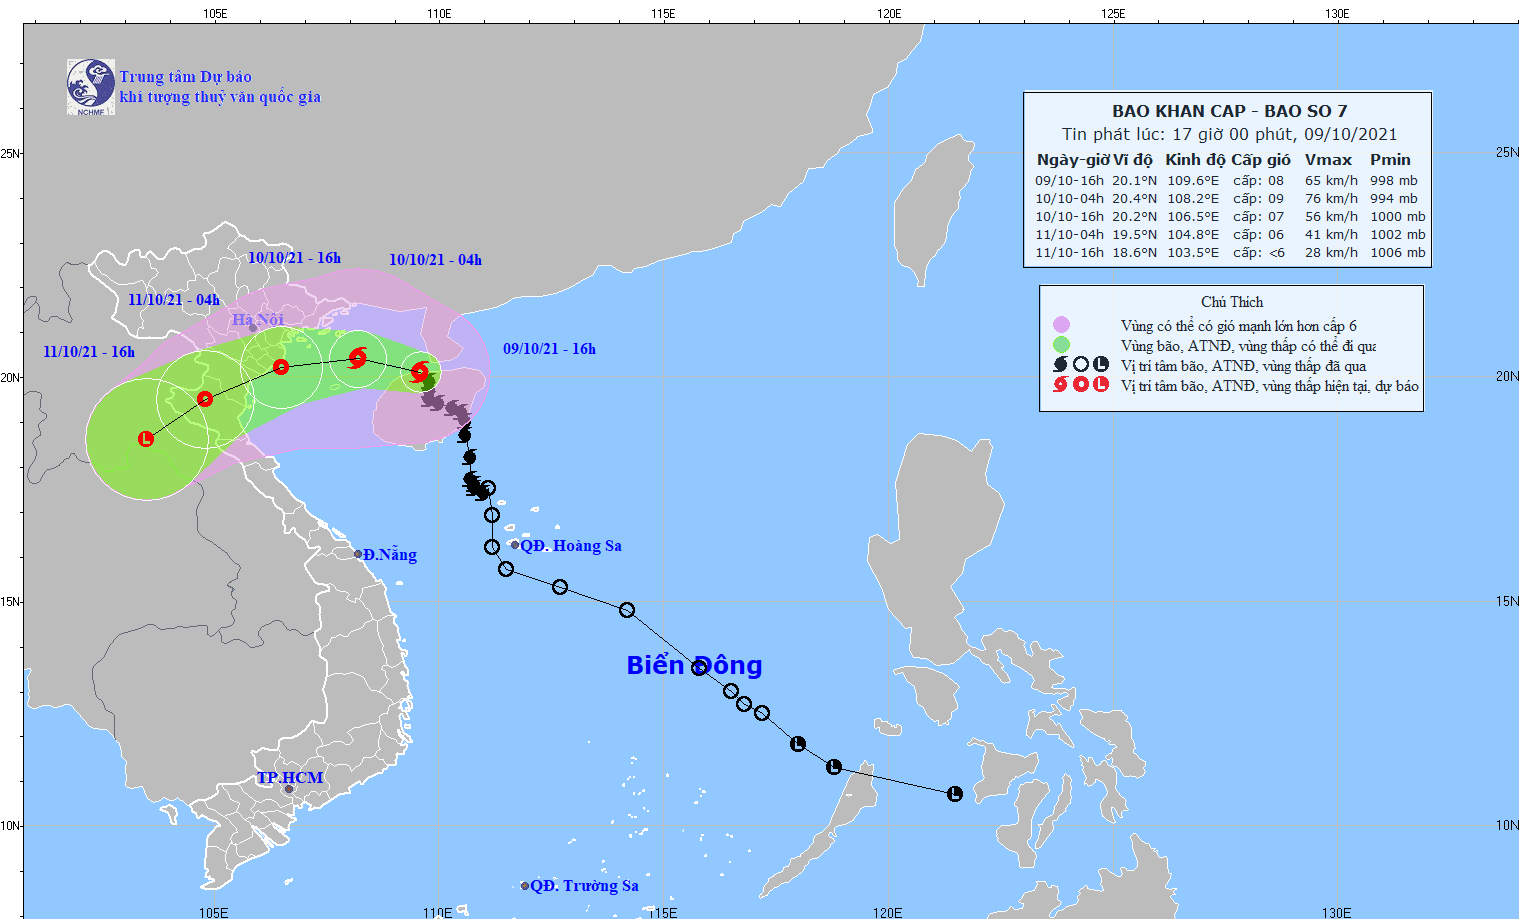 Following Lionrock, two more typhoons to form in East Sea